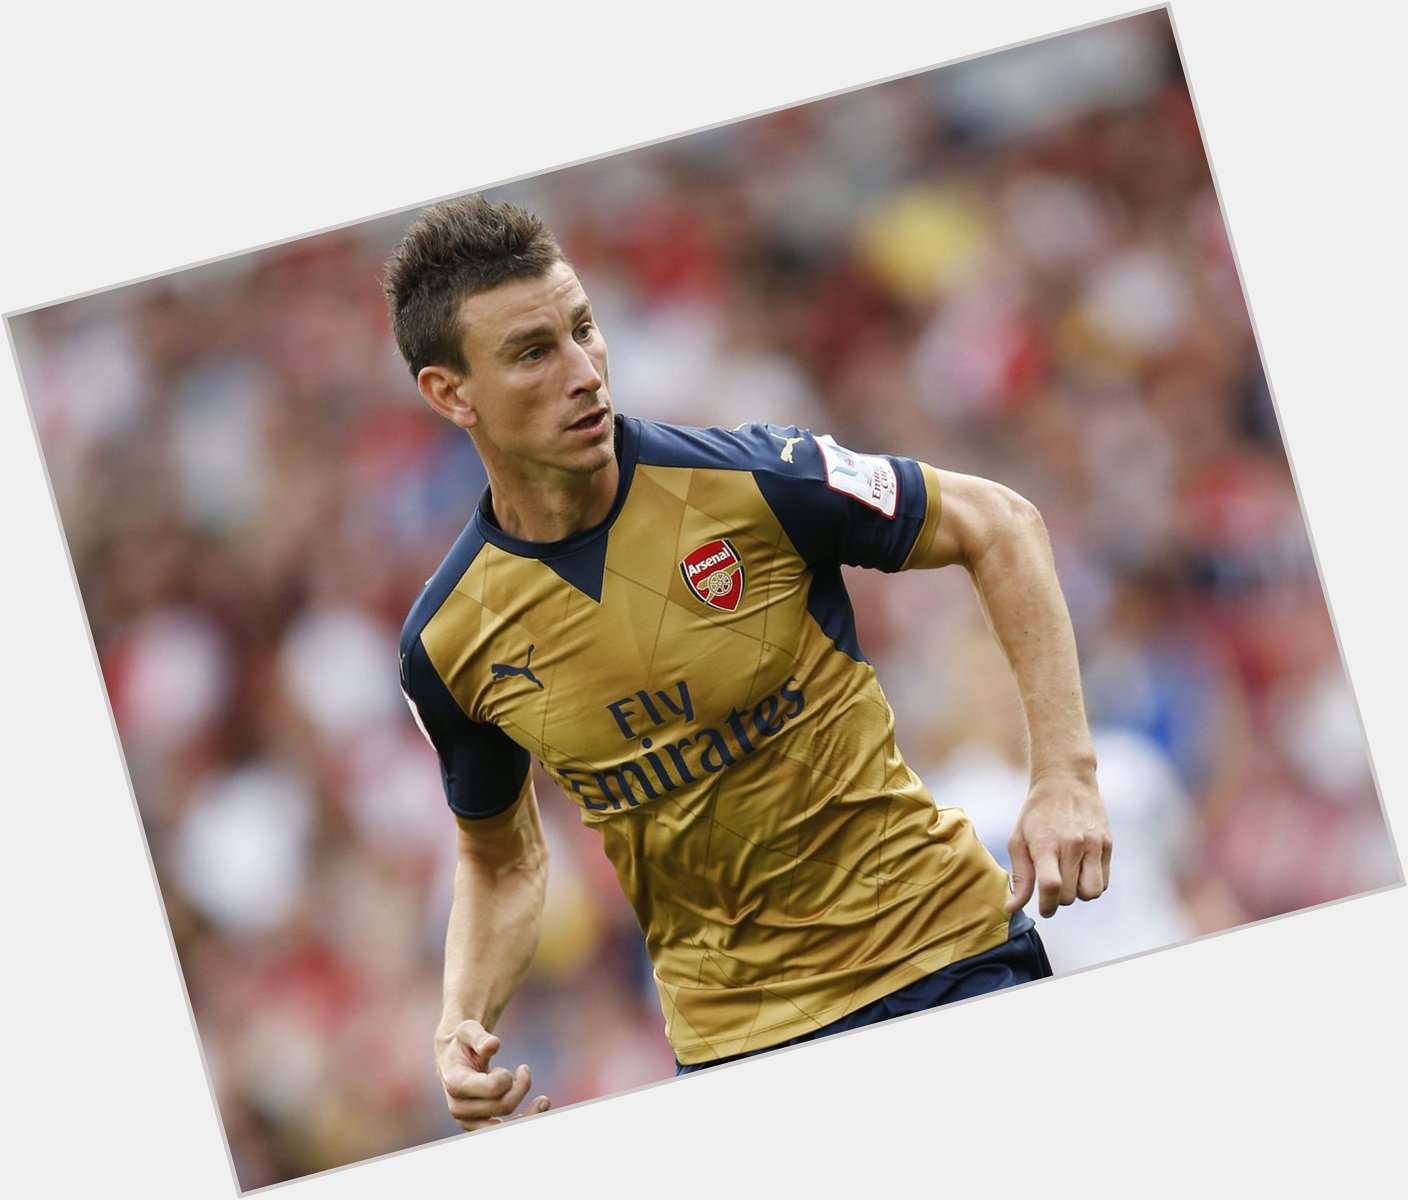 Happy birthday to Arsenal and France defender Laurent Koscielny, who turns 32 today! 